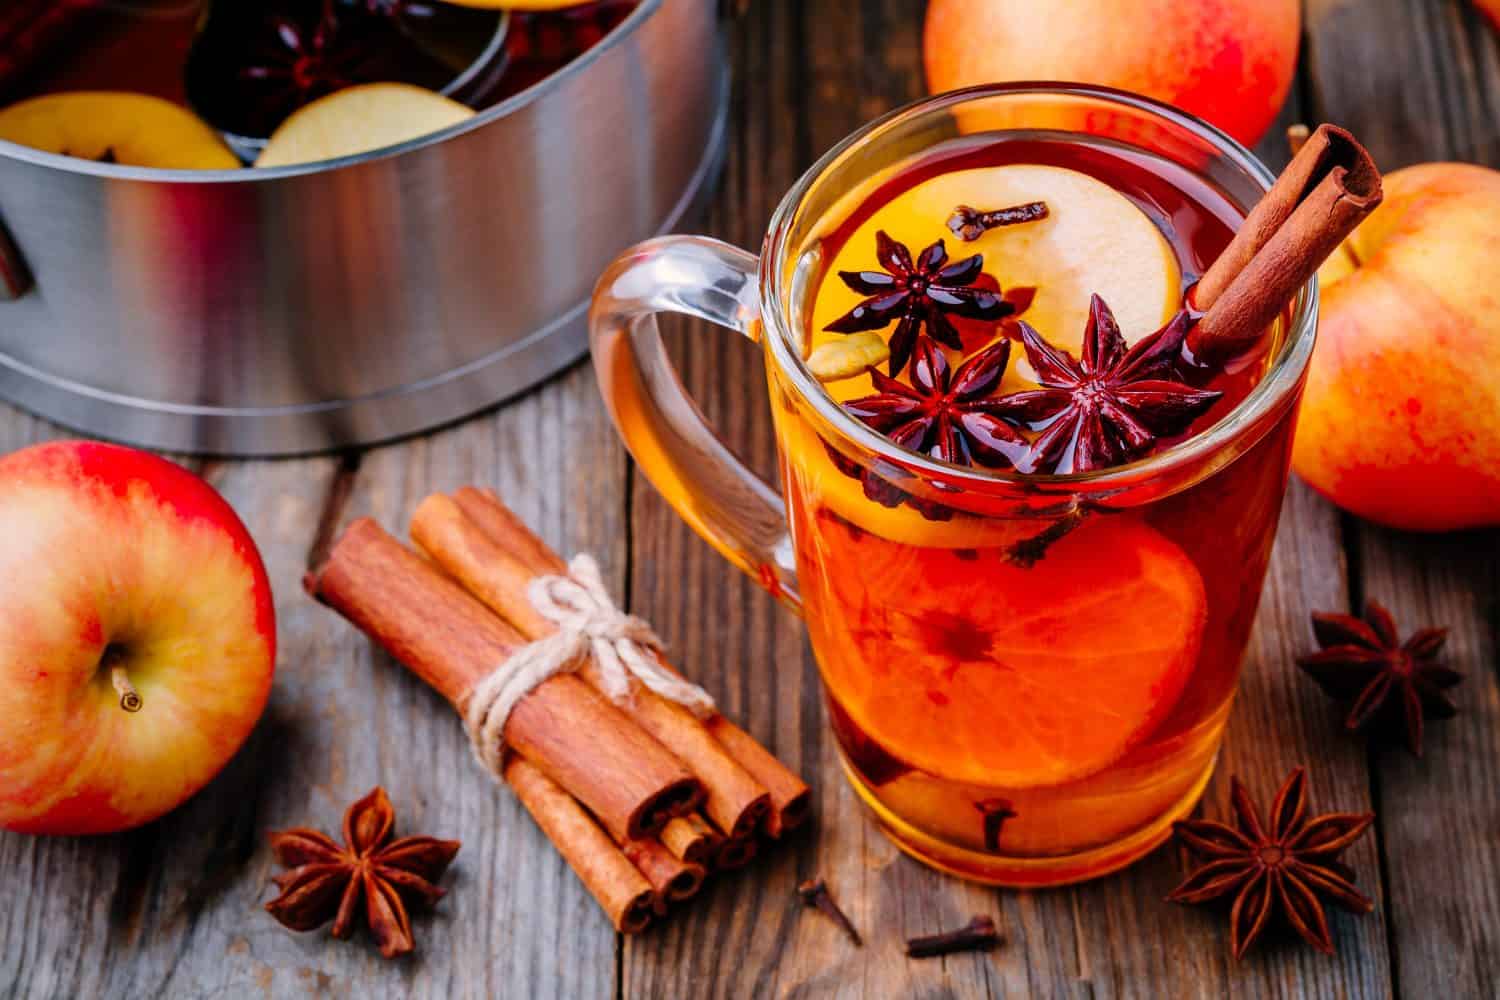 Hot mulled apple cider with with cinnamon sticks, cloves and anise on wooden background